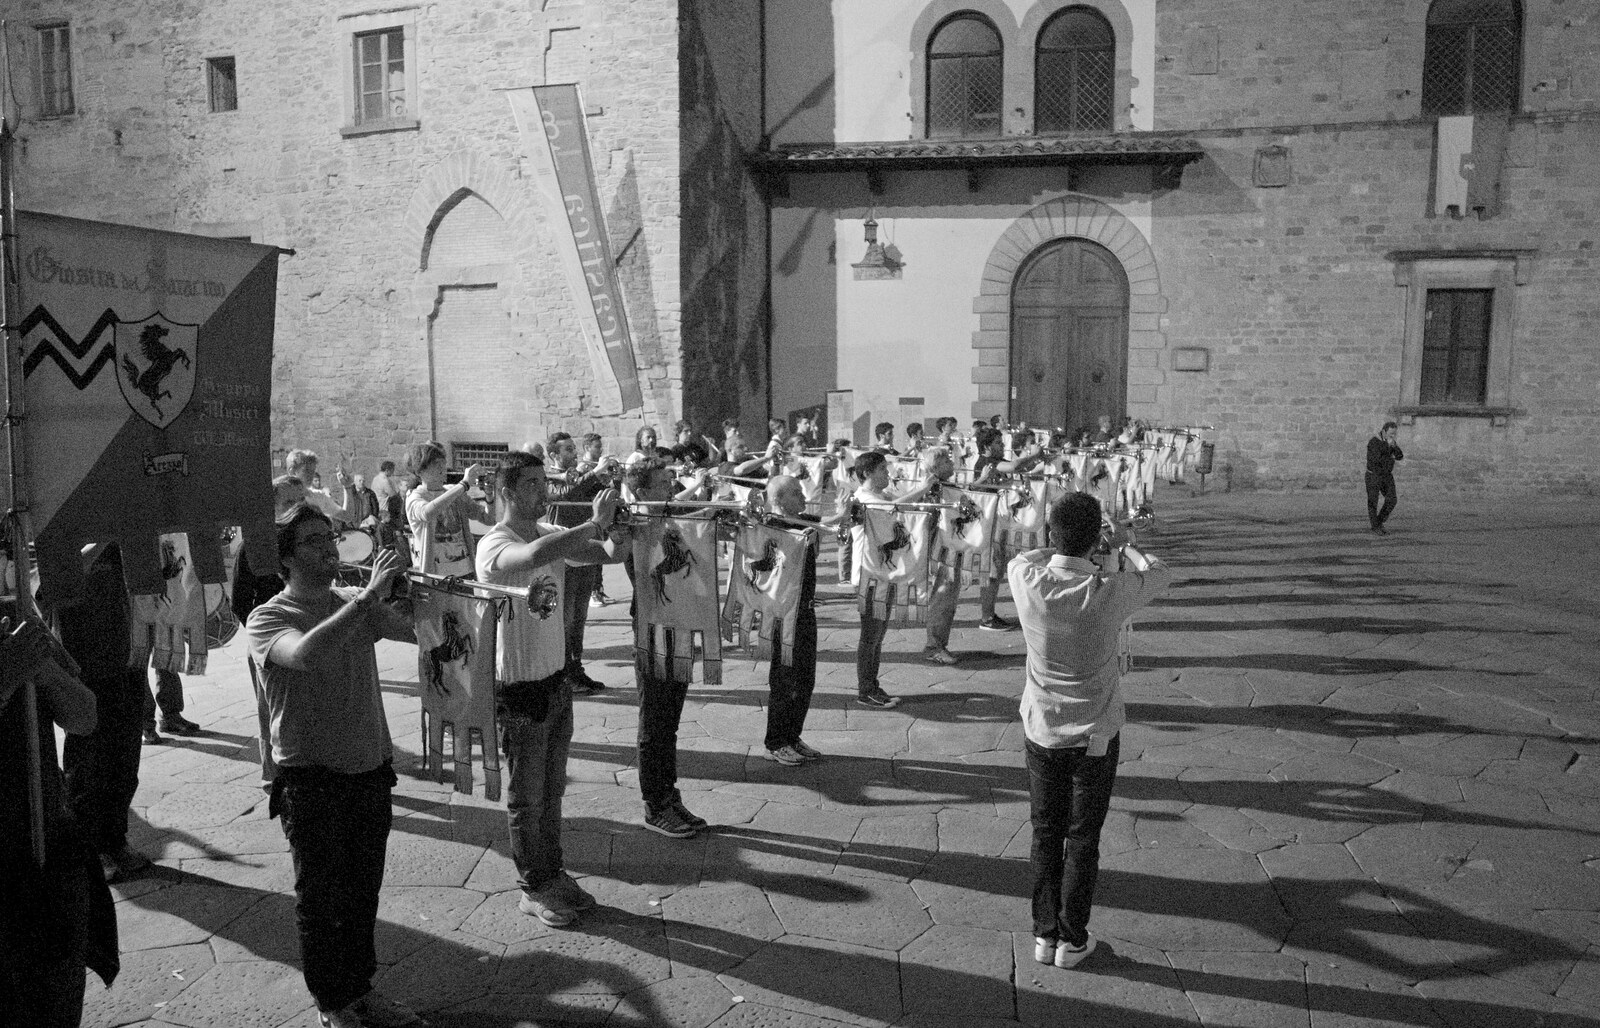 Massed trumpets from Italian Weddings, Saracens and Swimming Pools, Arezzo, Tuscany - 12th June 2013